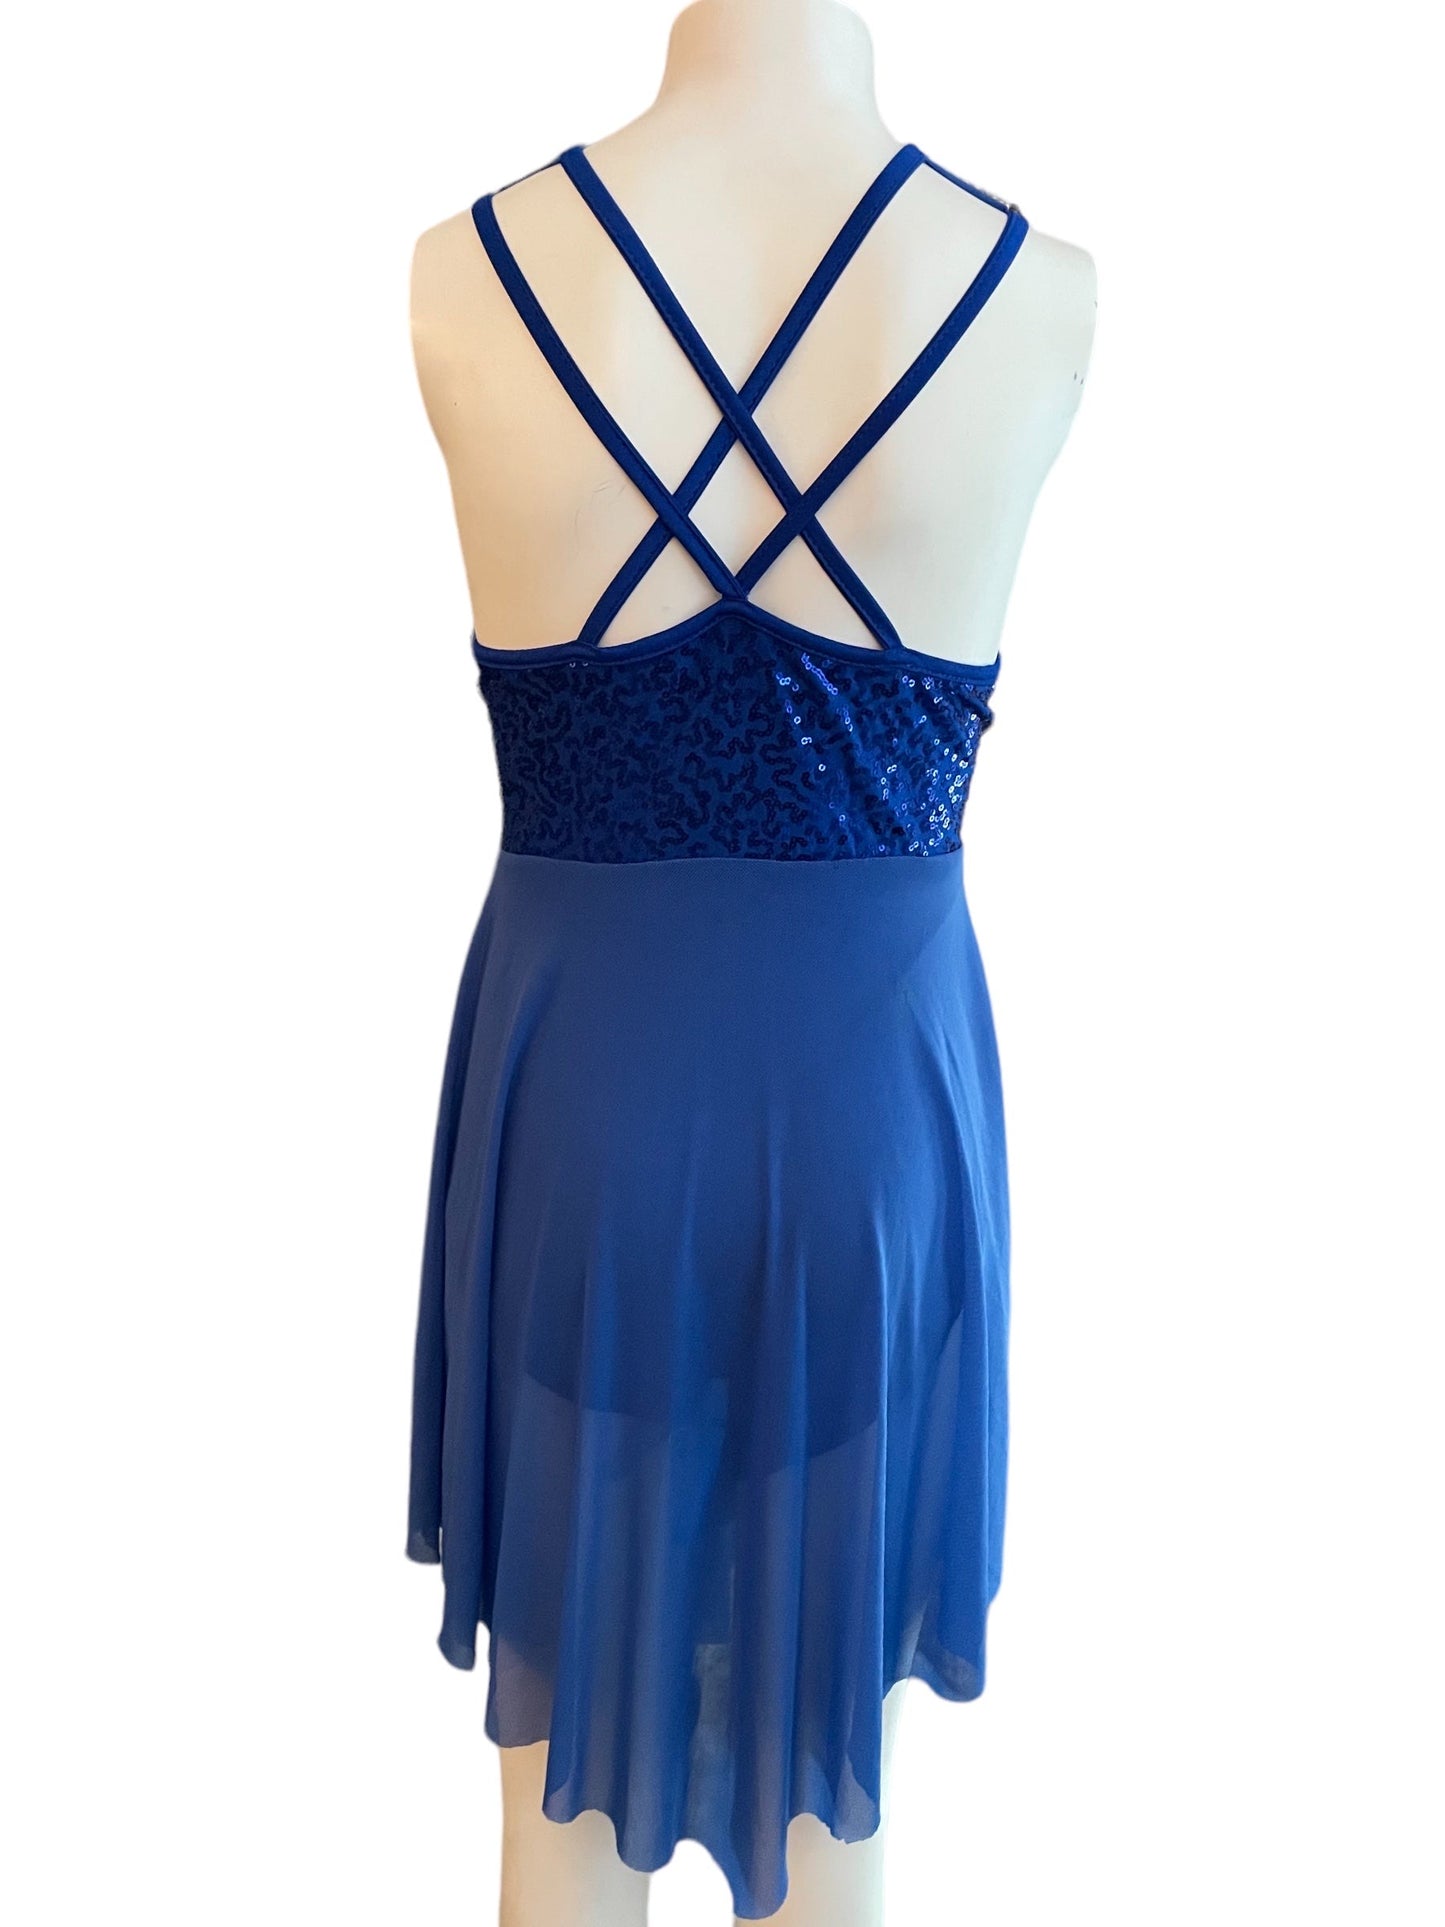 BLUE SEQUIN AND MESH DRESS